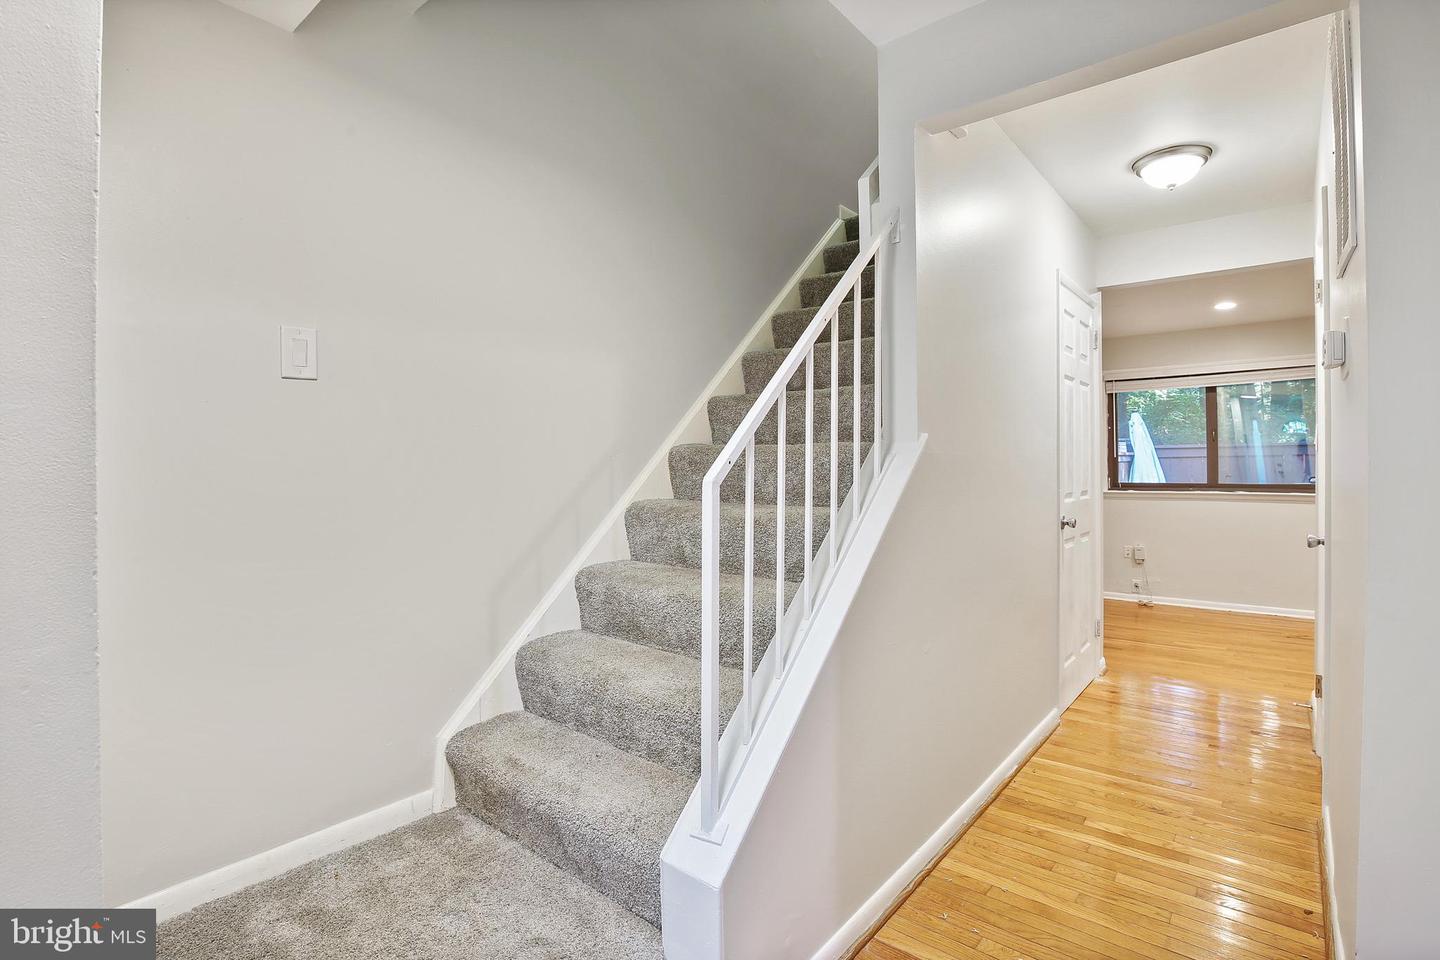 Photo 9 of 27 of 2323 Emerald Heights Ct townhome